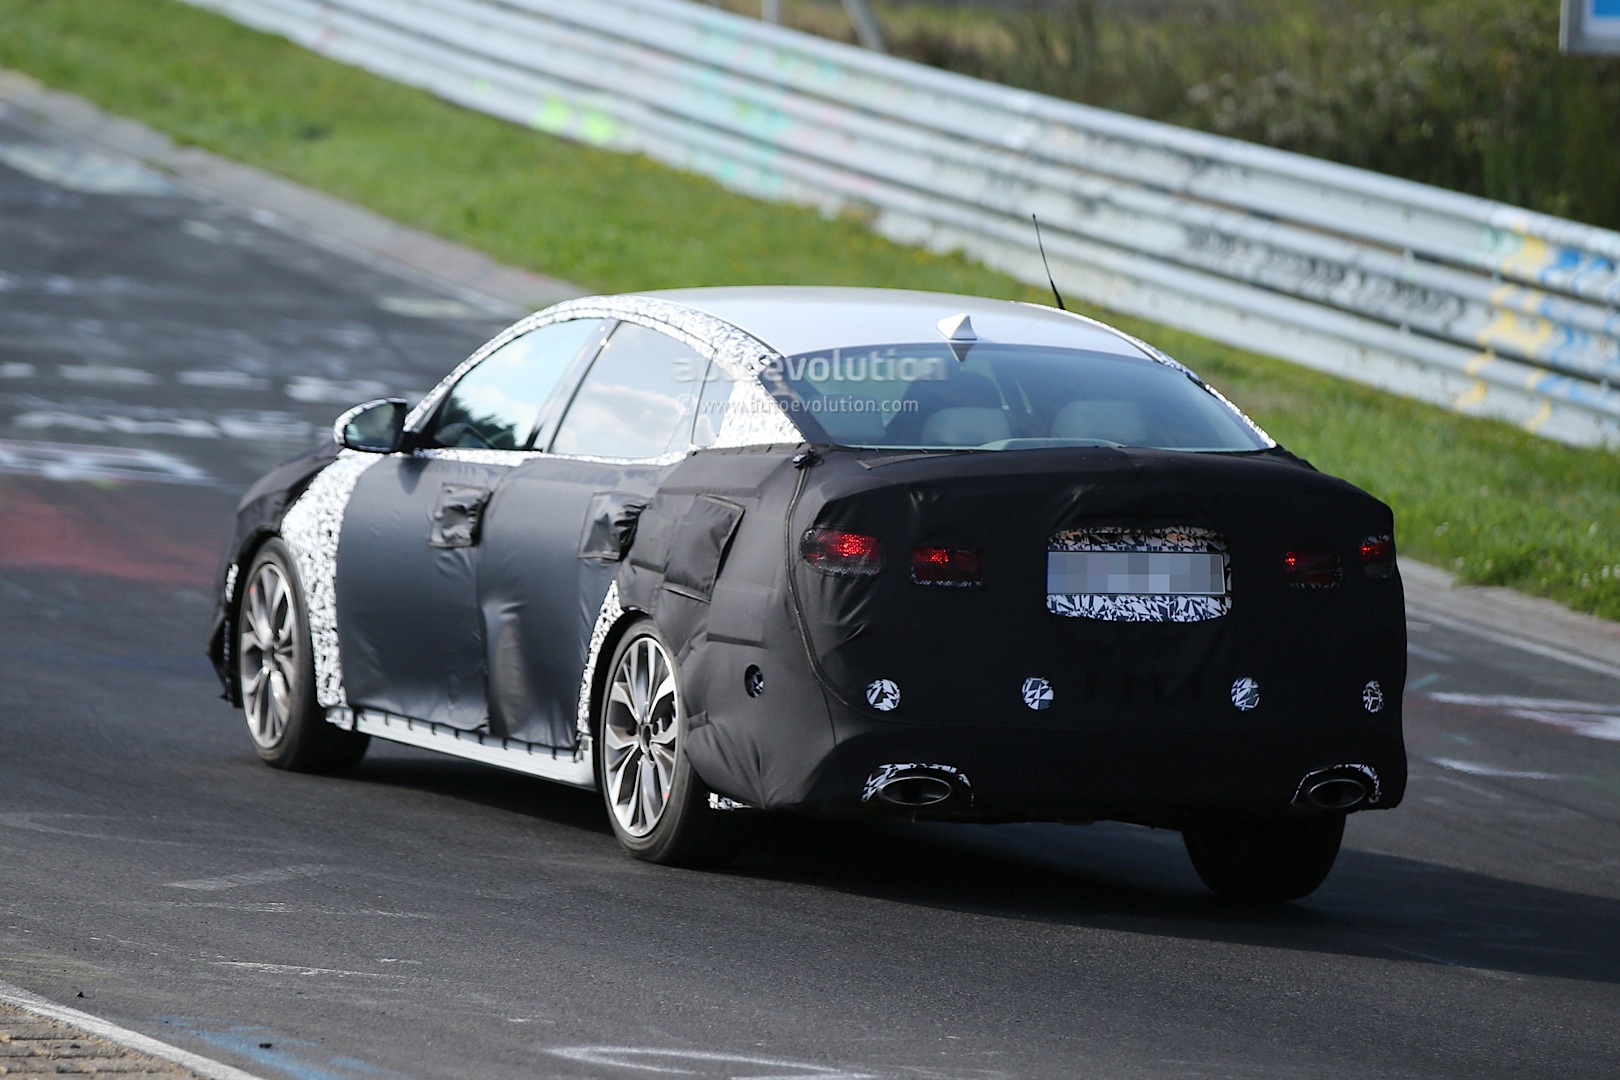 all-new-2016-kia-optima-spied-for-the-first-time-including-the-interior_12